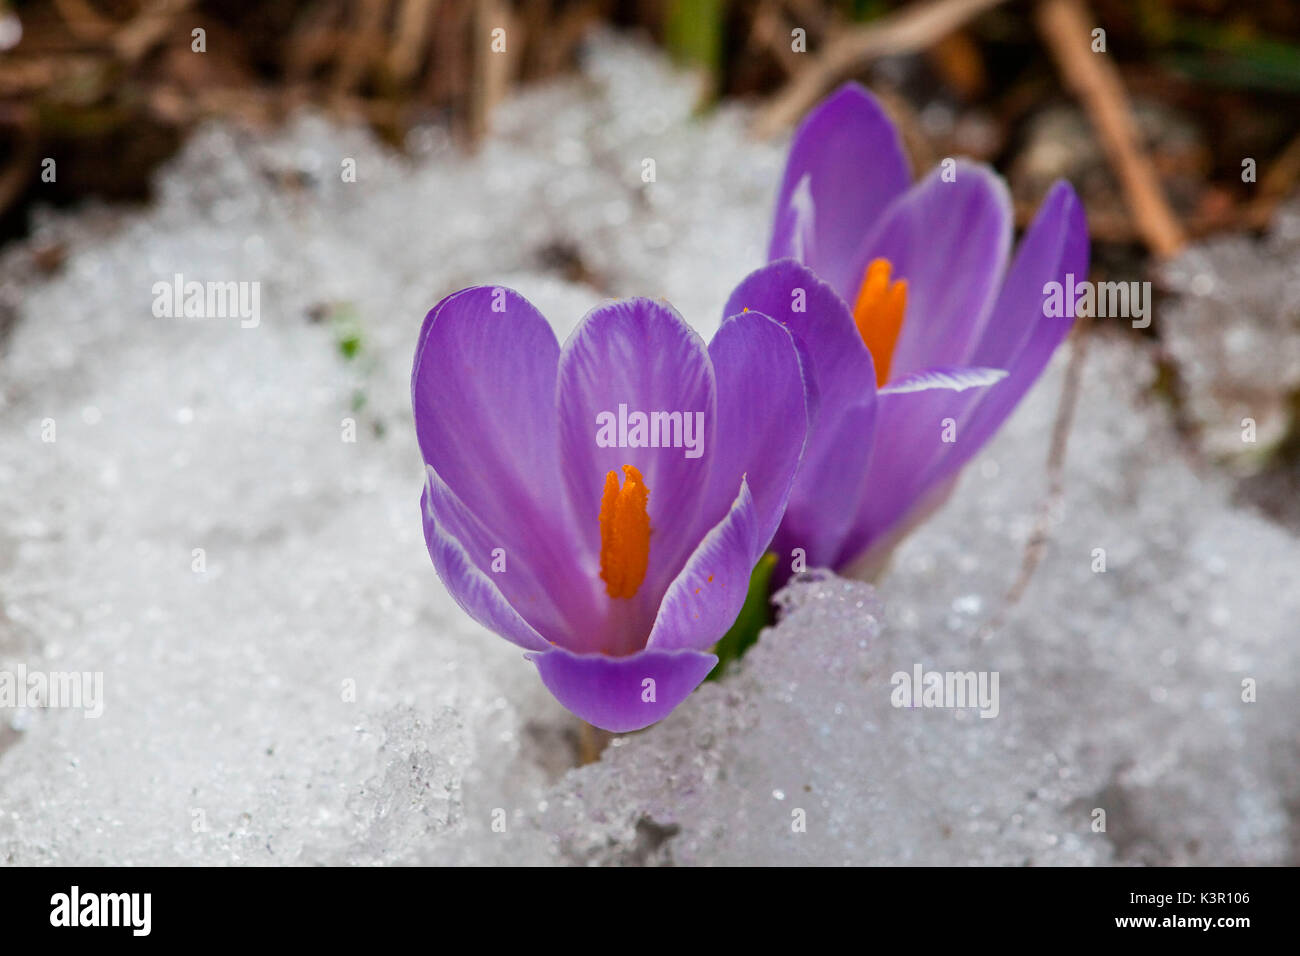 Crocus are one of the brightest and earliest spring blooming flowers. Lombardy Italy Europe Stock Photo